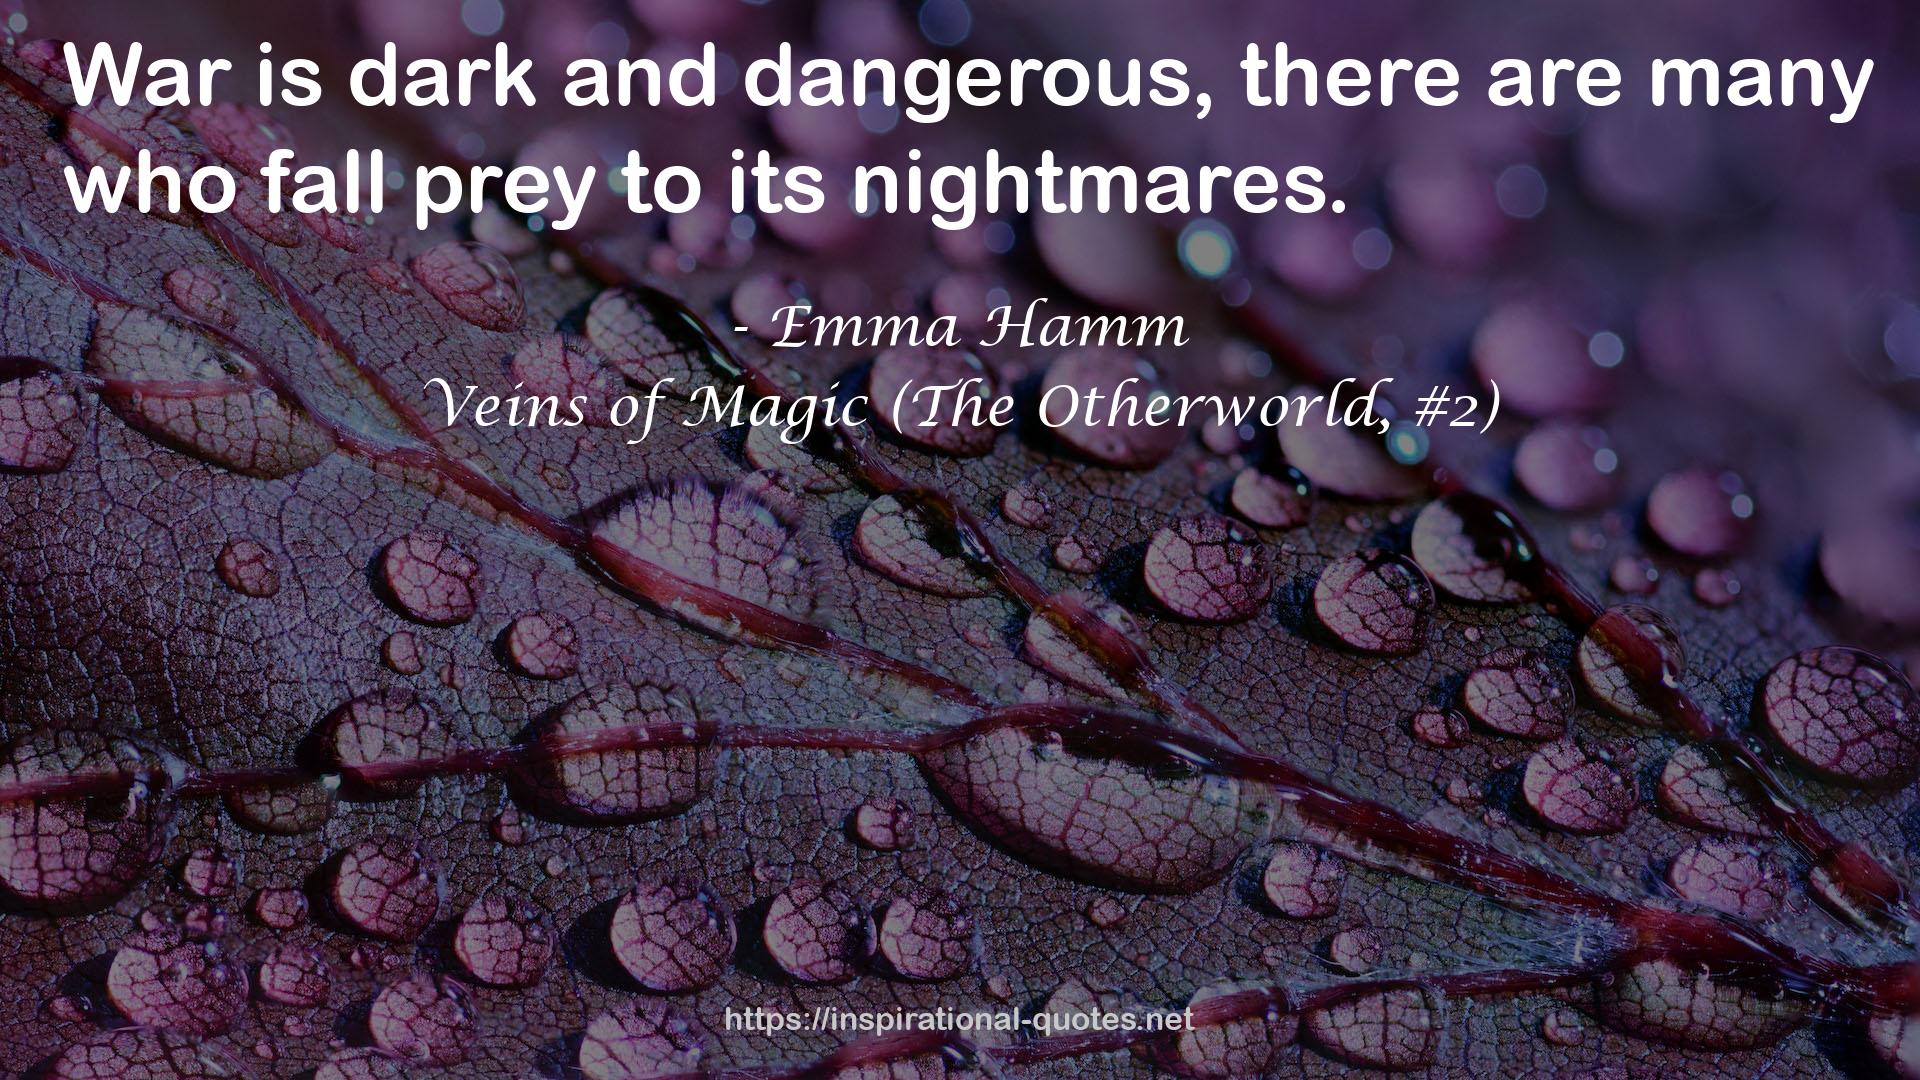 Veins of Magic (The Otherworld, #2) QUOTES